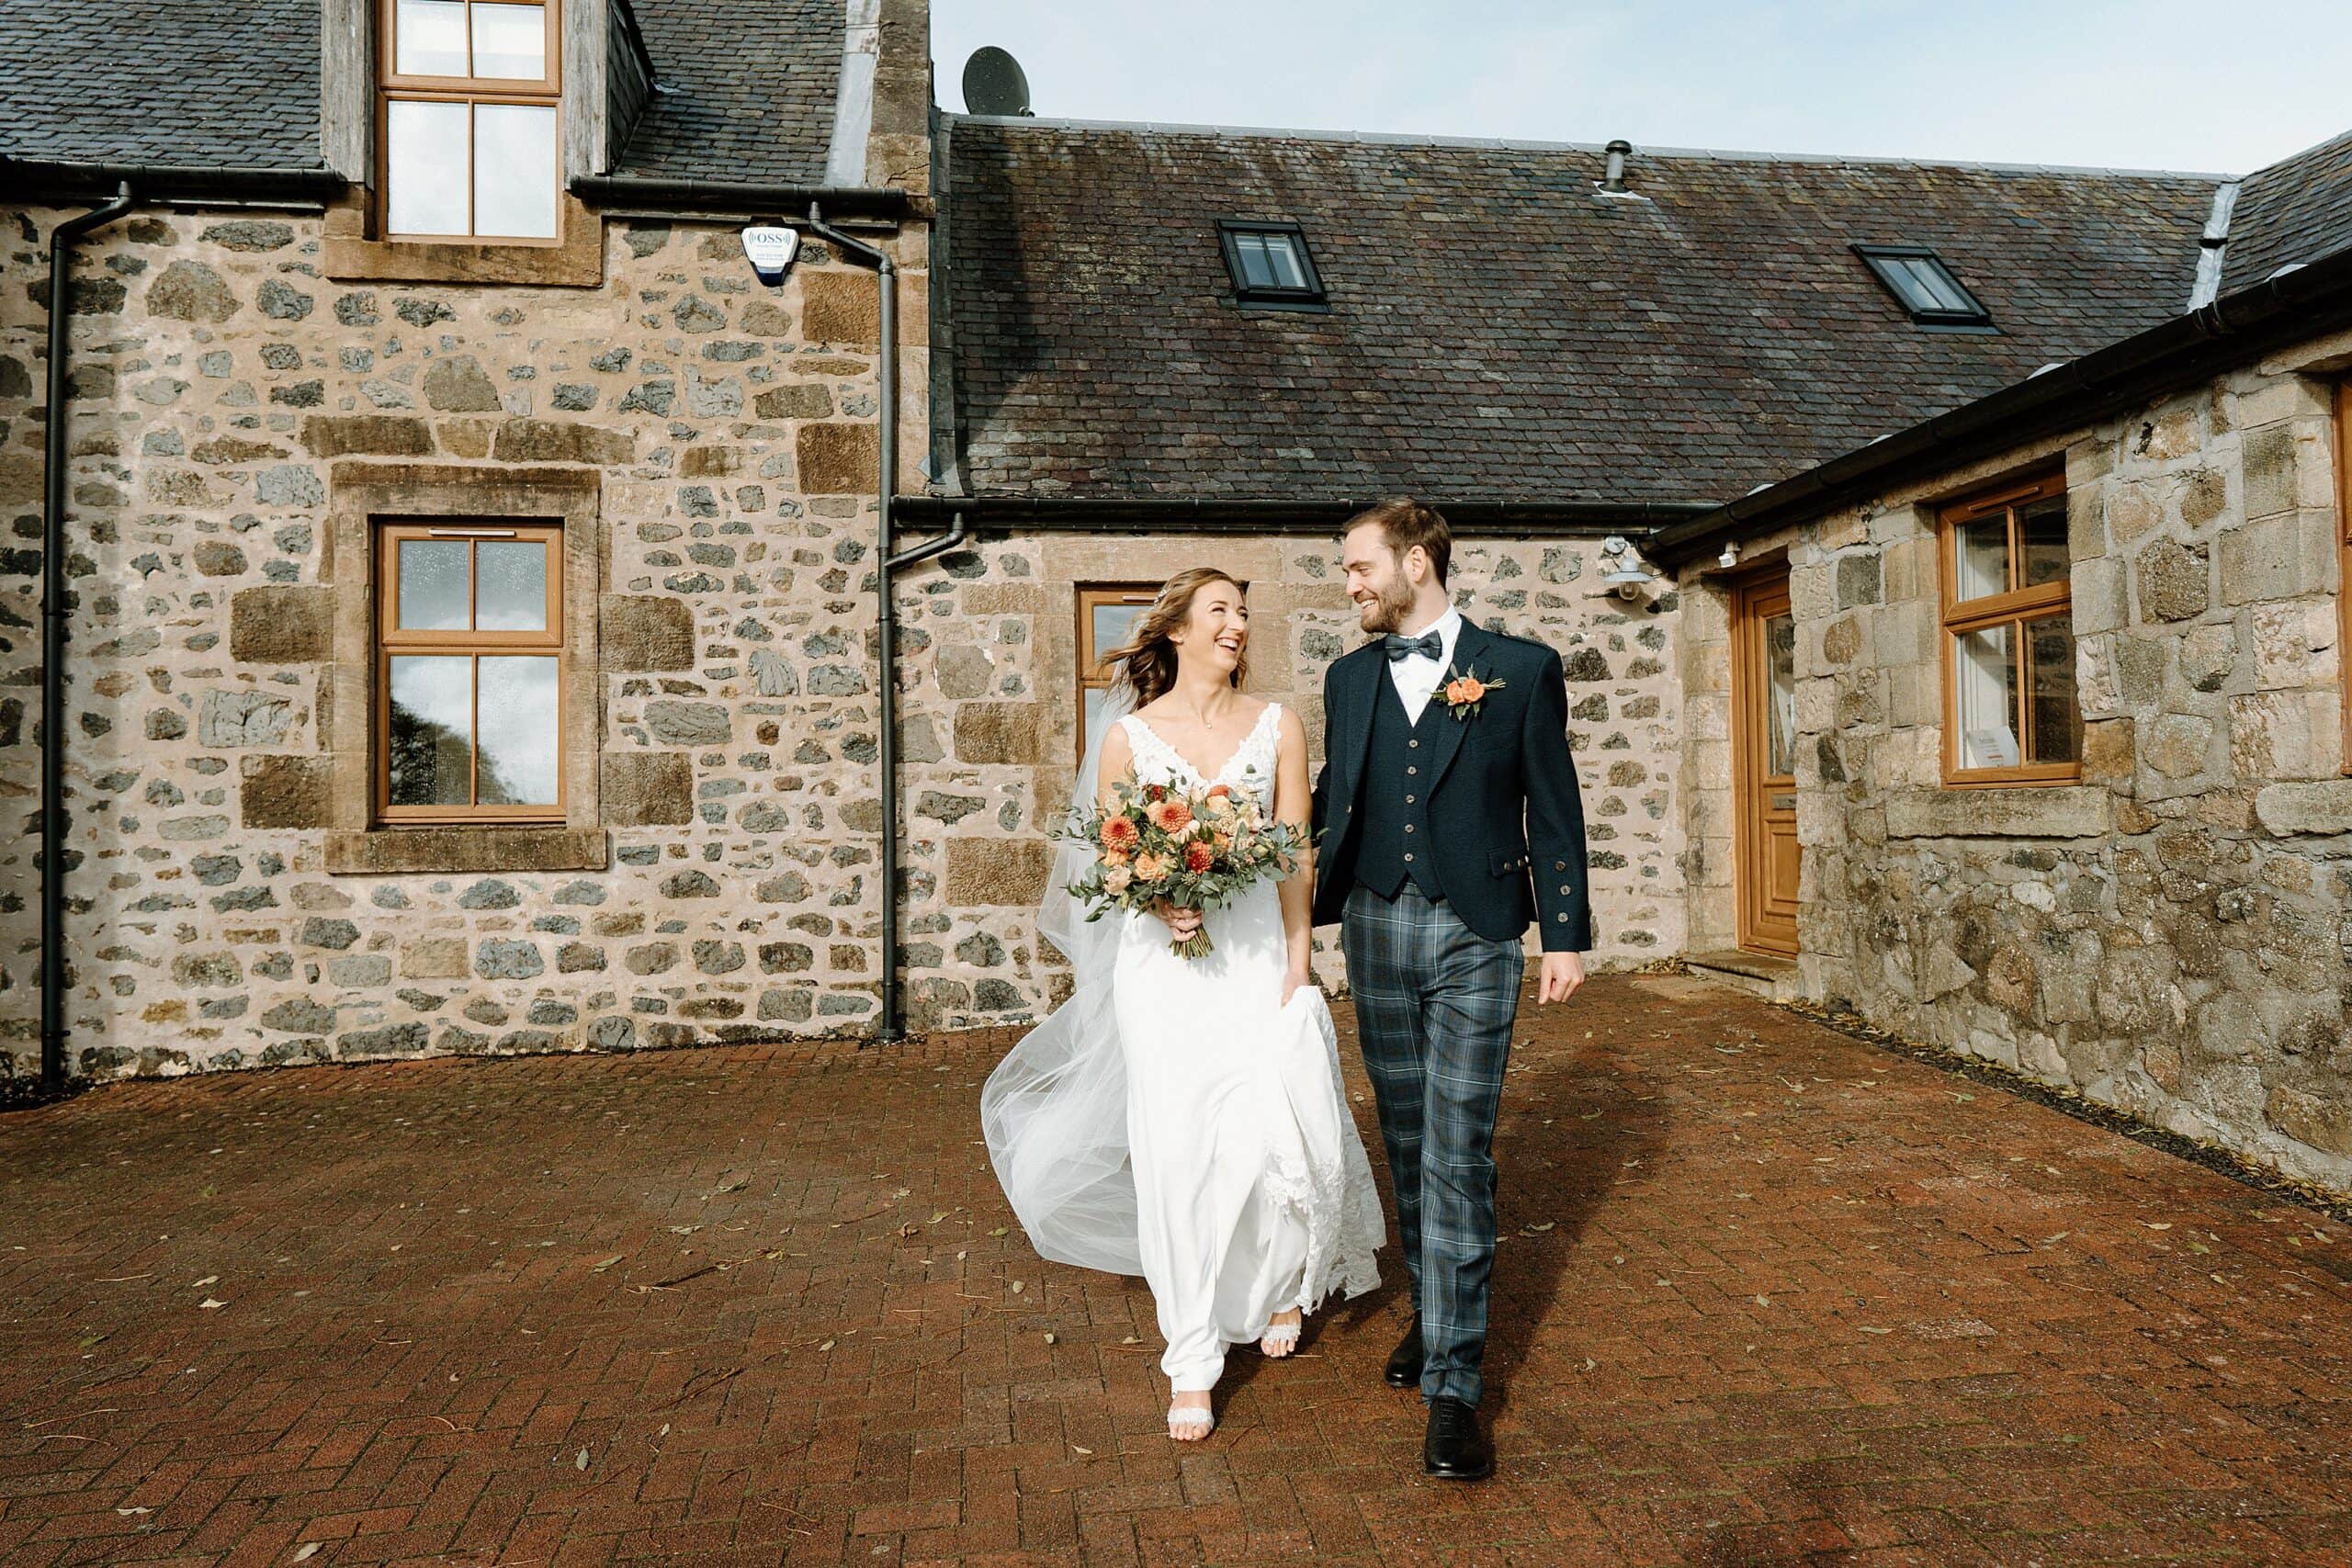 outside exterior view of harelaw farm wedding barn venue fenwick scotland showing bride and groom holding ands and smiling